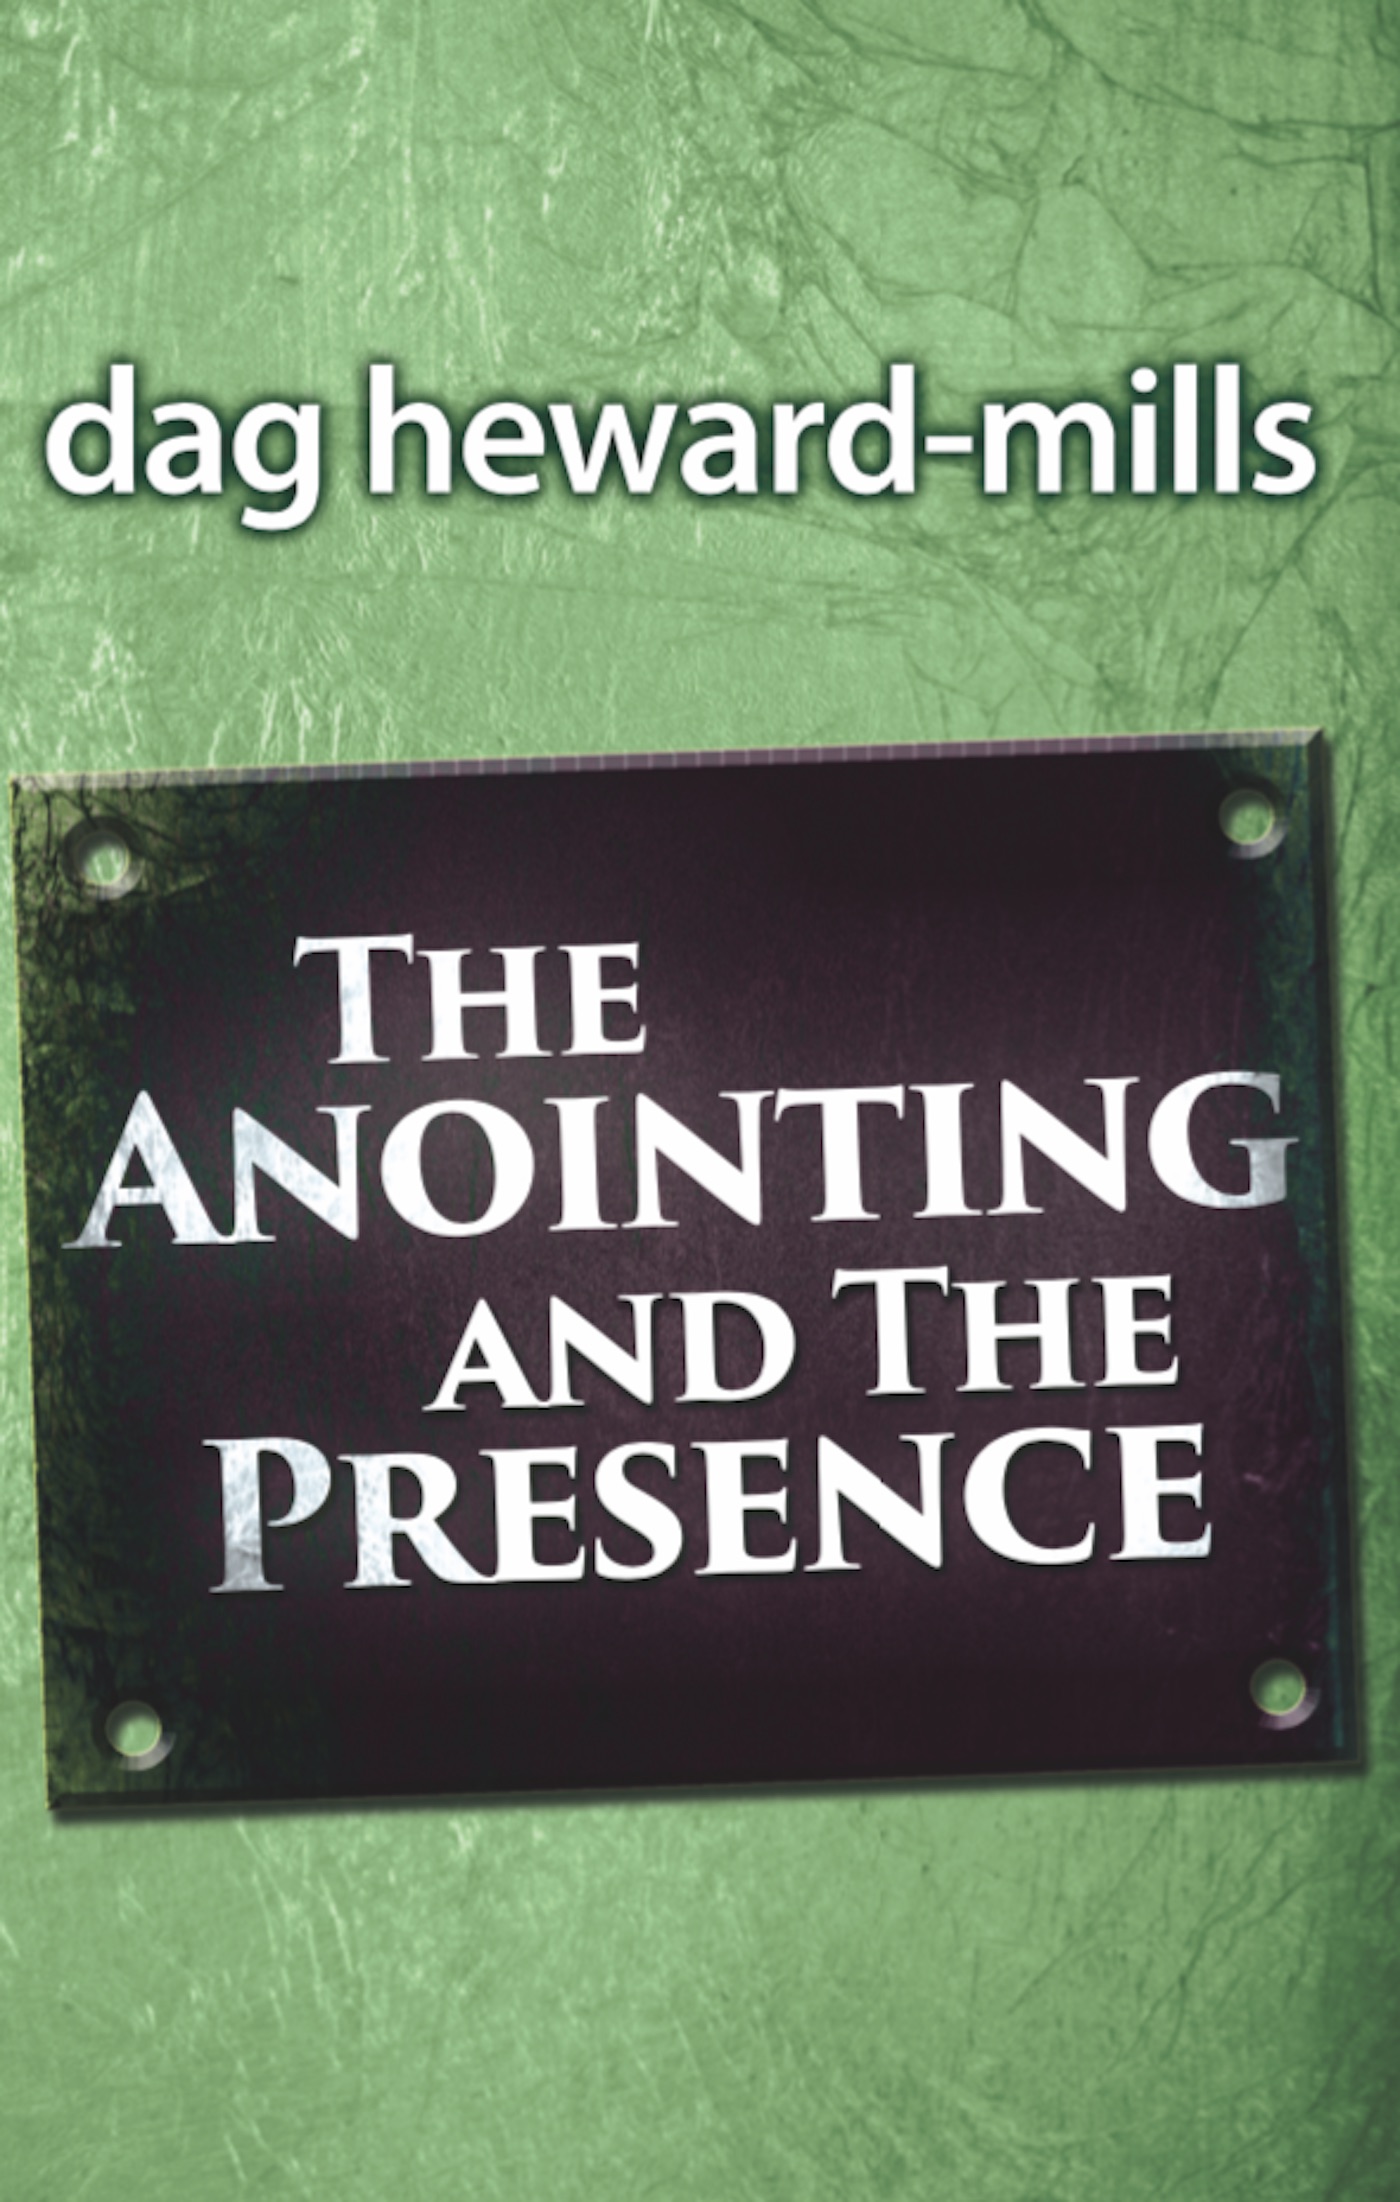 The Anointing and the Presence by Dag Heward-Mills